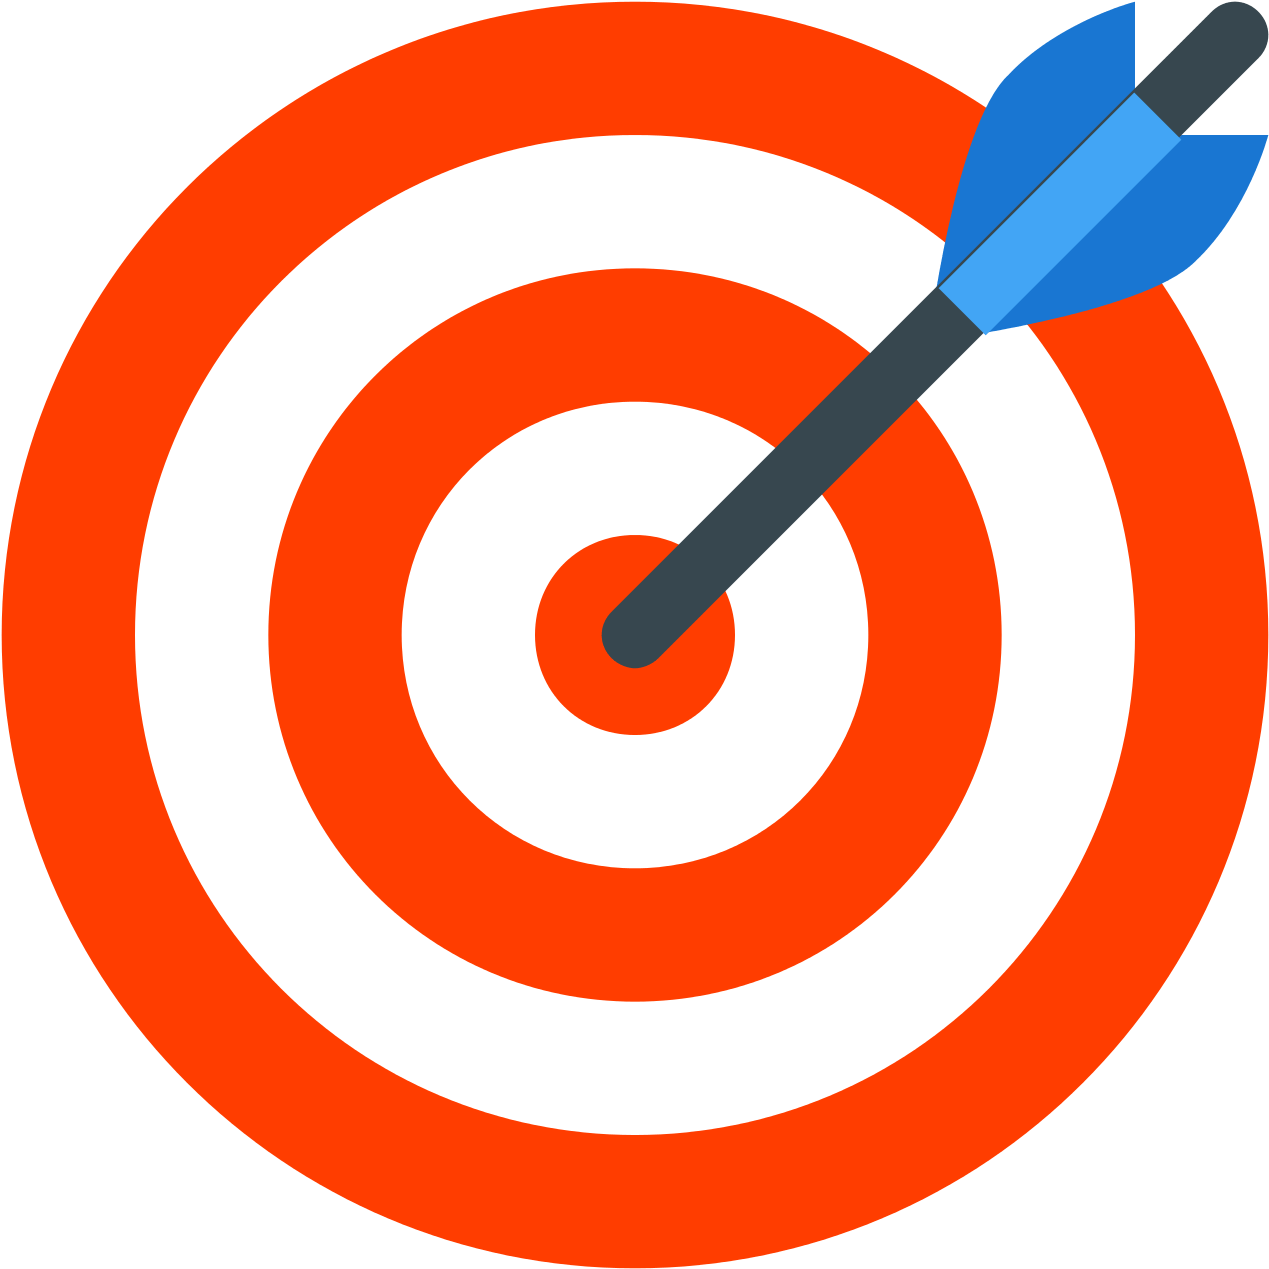 clipart about Stick To Your Goals - Icon For Objective, Find more high qual...